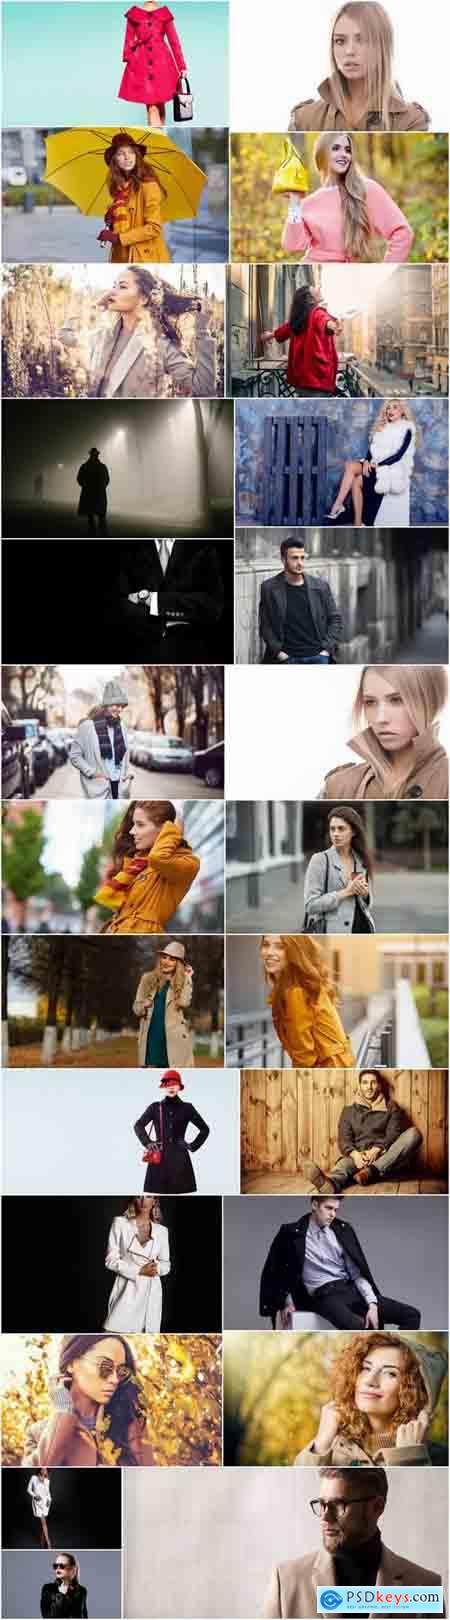 People in warm clothes coat autumn woman man 25 HQ Jpeg